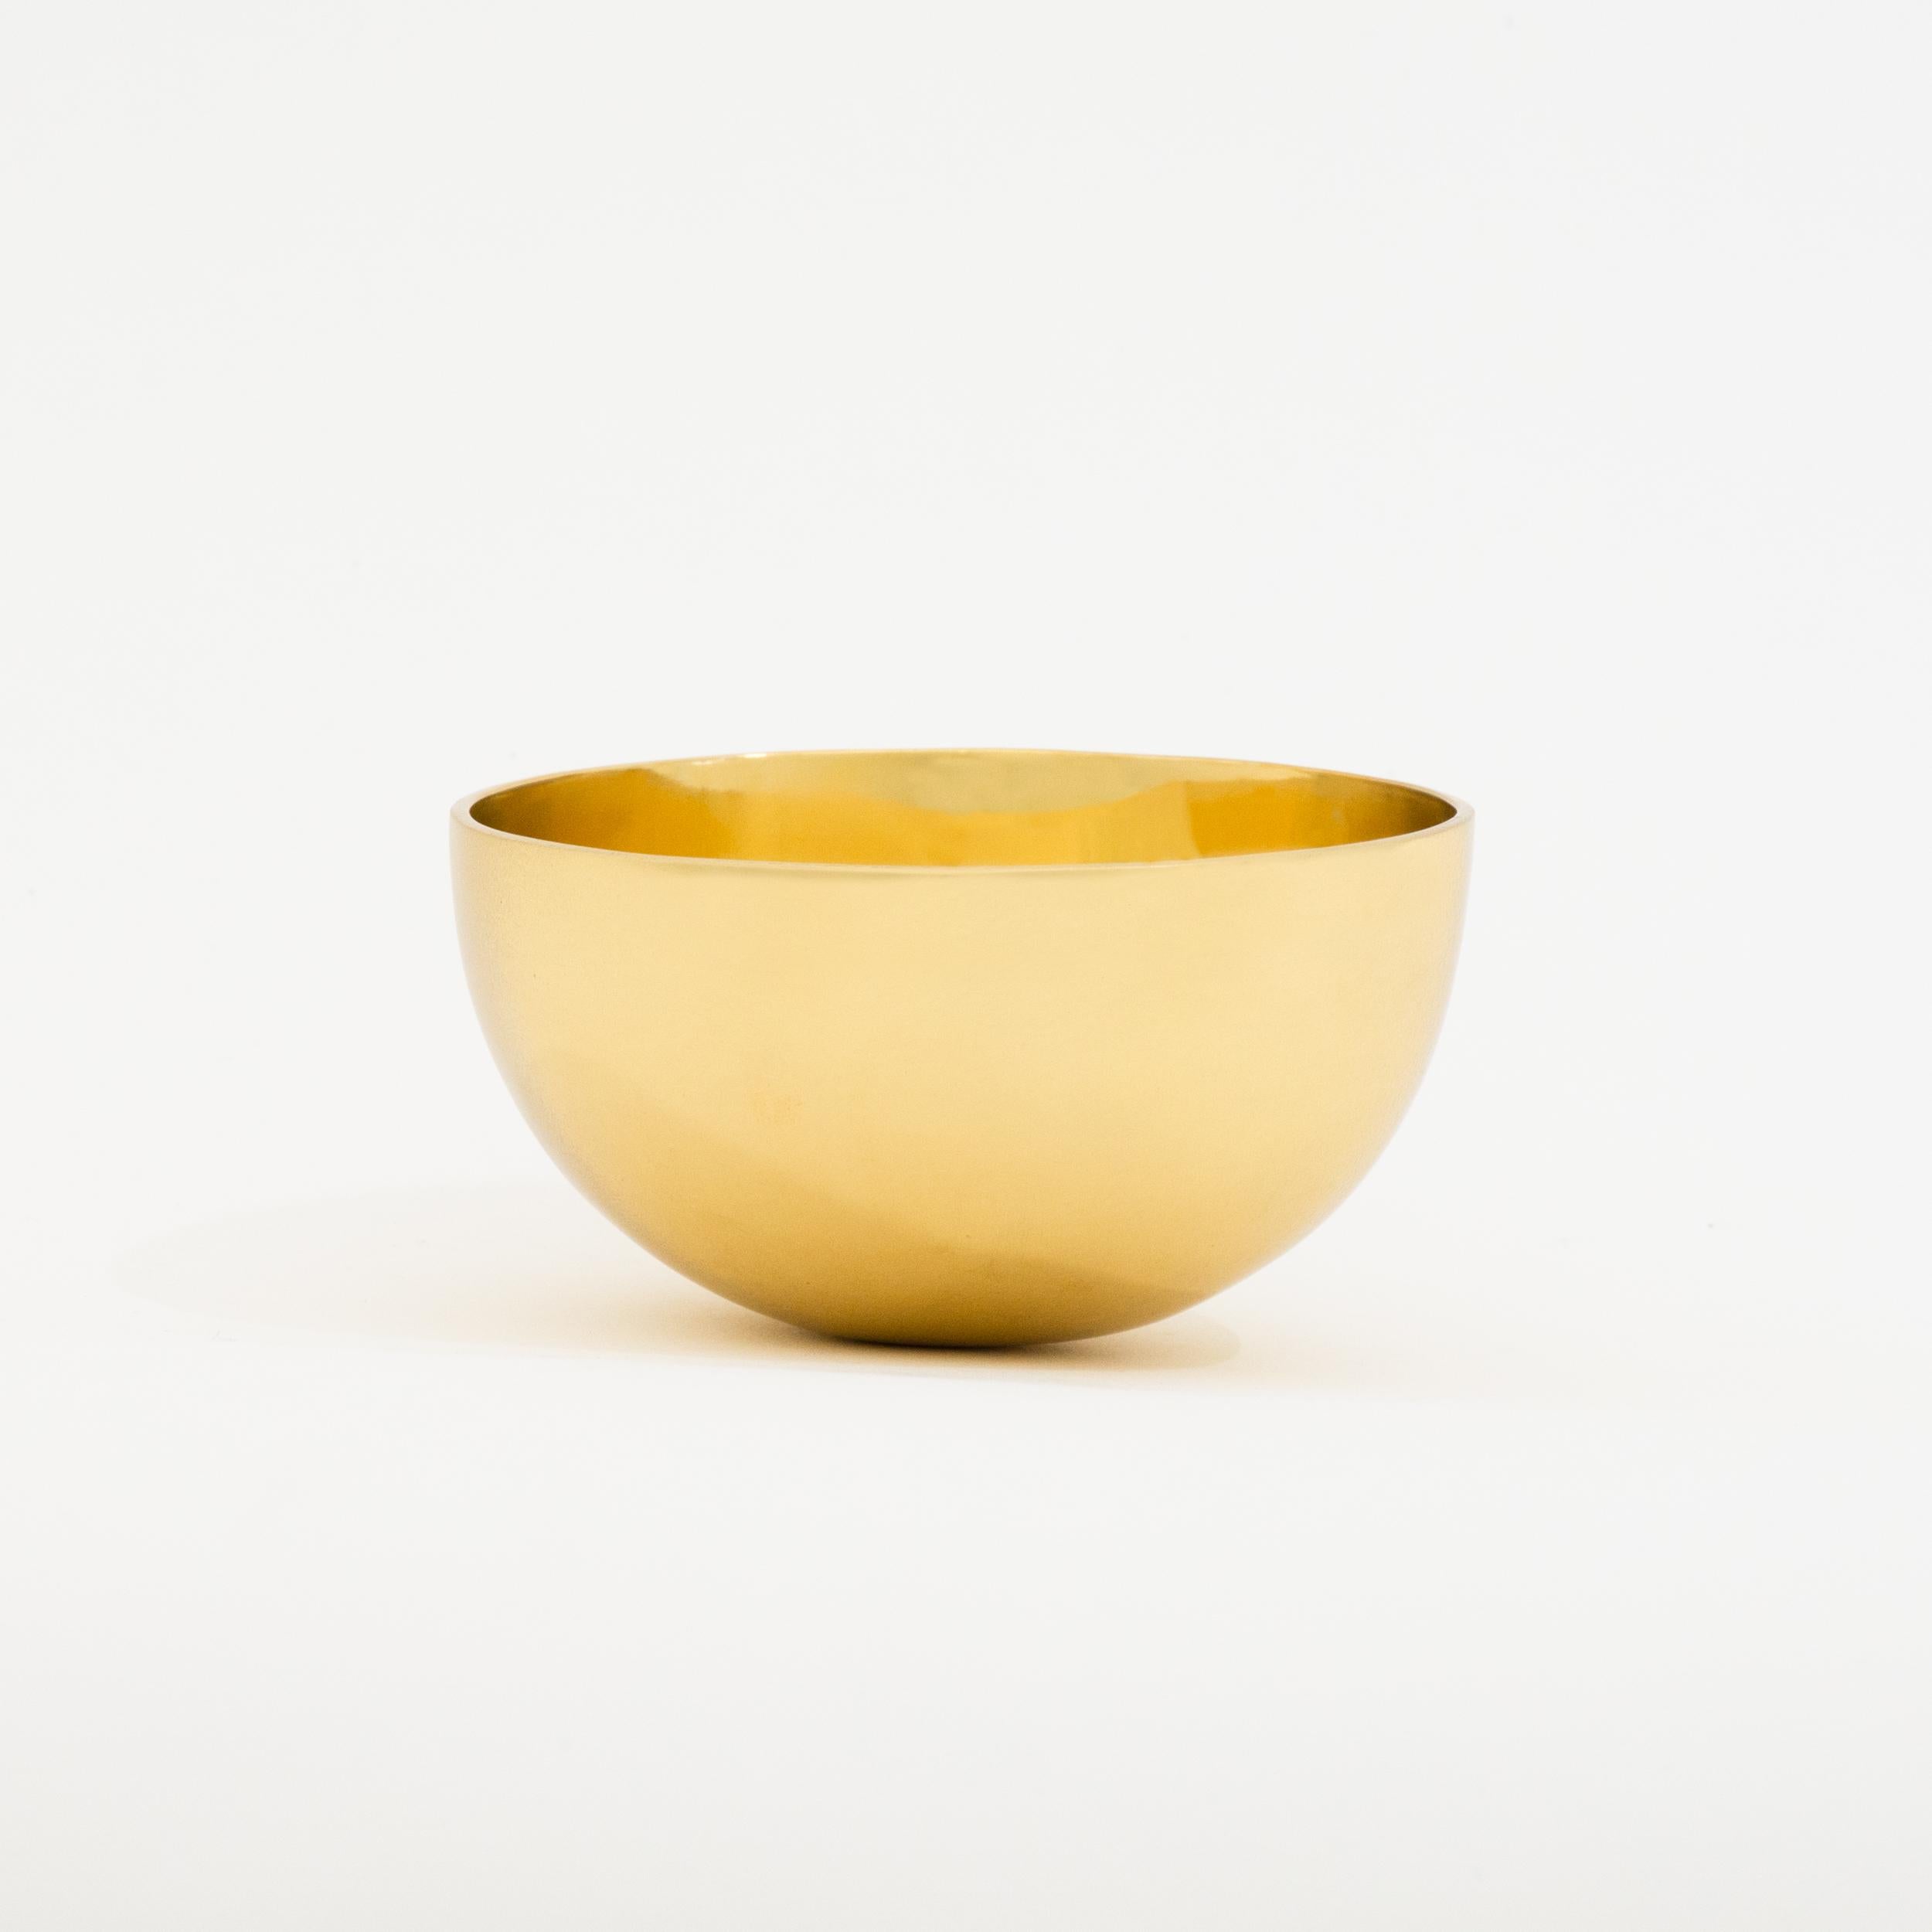 Handmade polished brass decorative bowl.

Each of those original and elegant bowls are handmade individually. Cast using very traditional techniques.

Slight variations in polished finishes, patterns and sizes are characteristics of such original